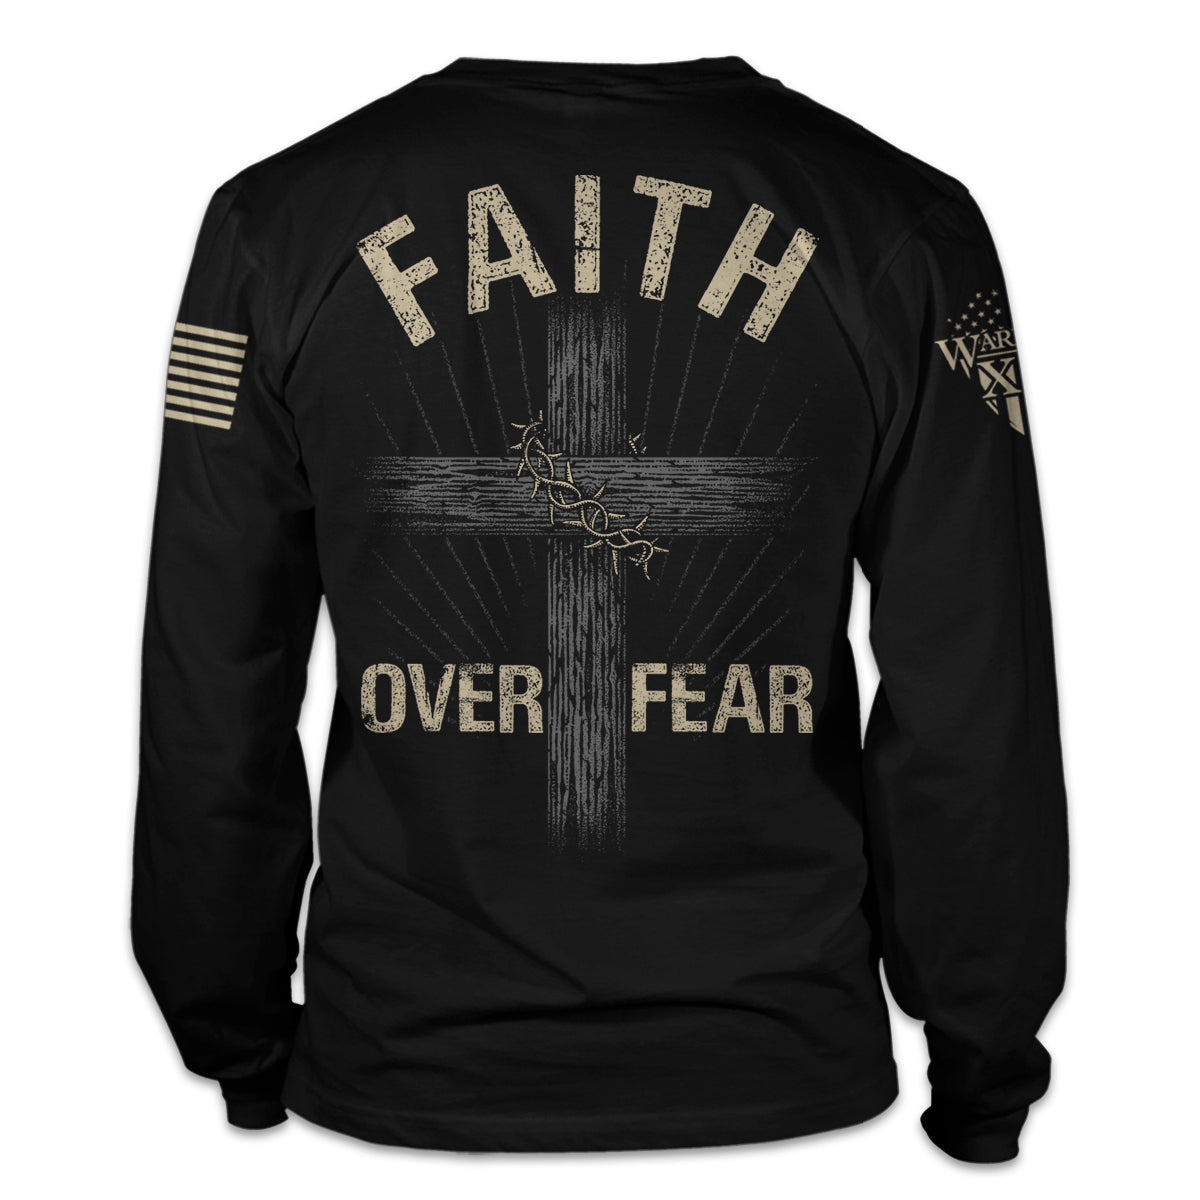 A black long sleeve shirt with the words "Faith Over Fear" with a cross printed on the back of the shirt.